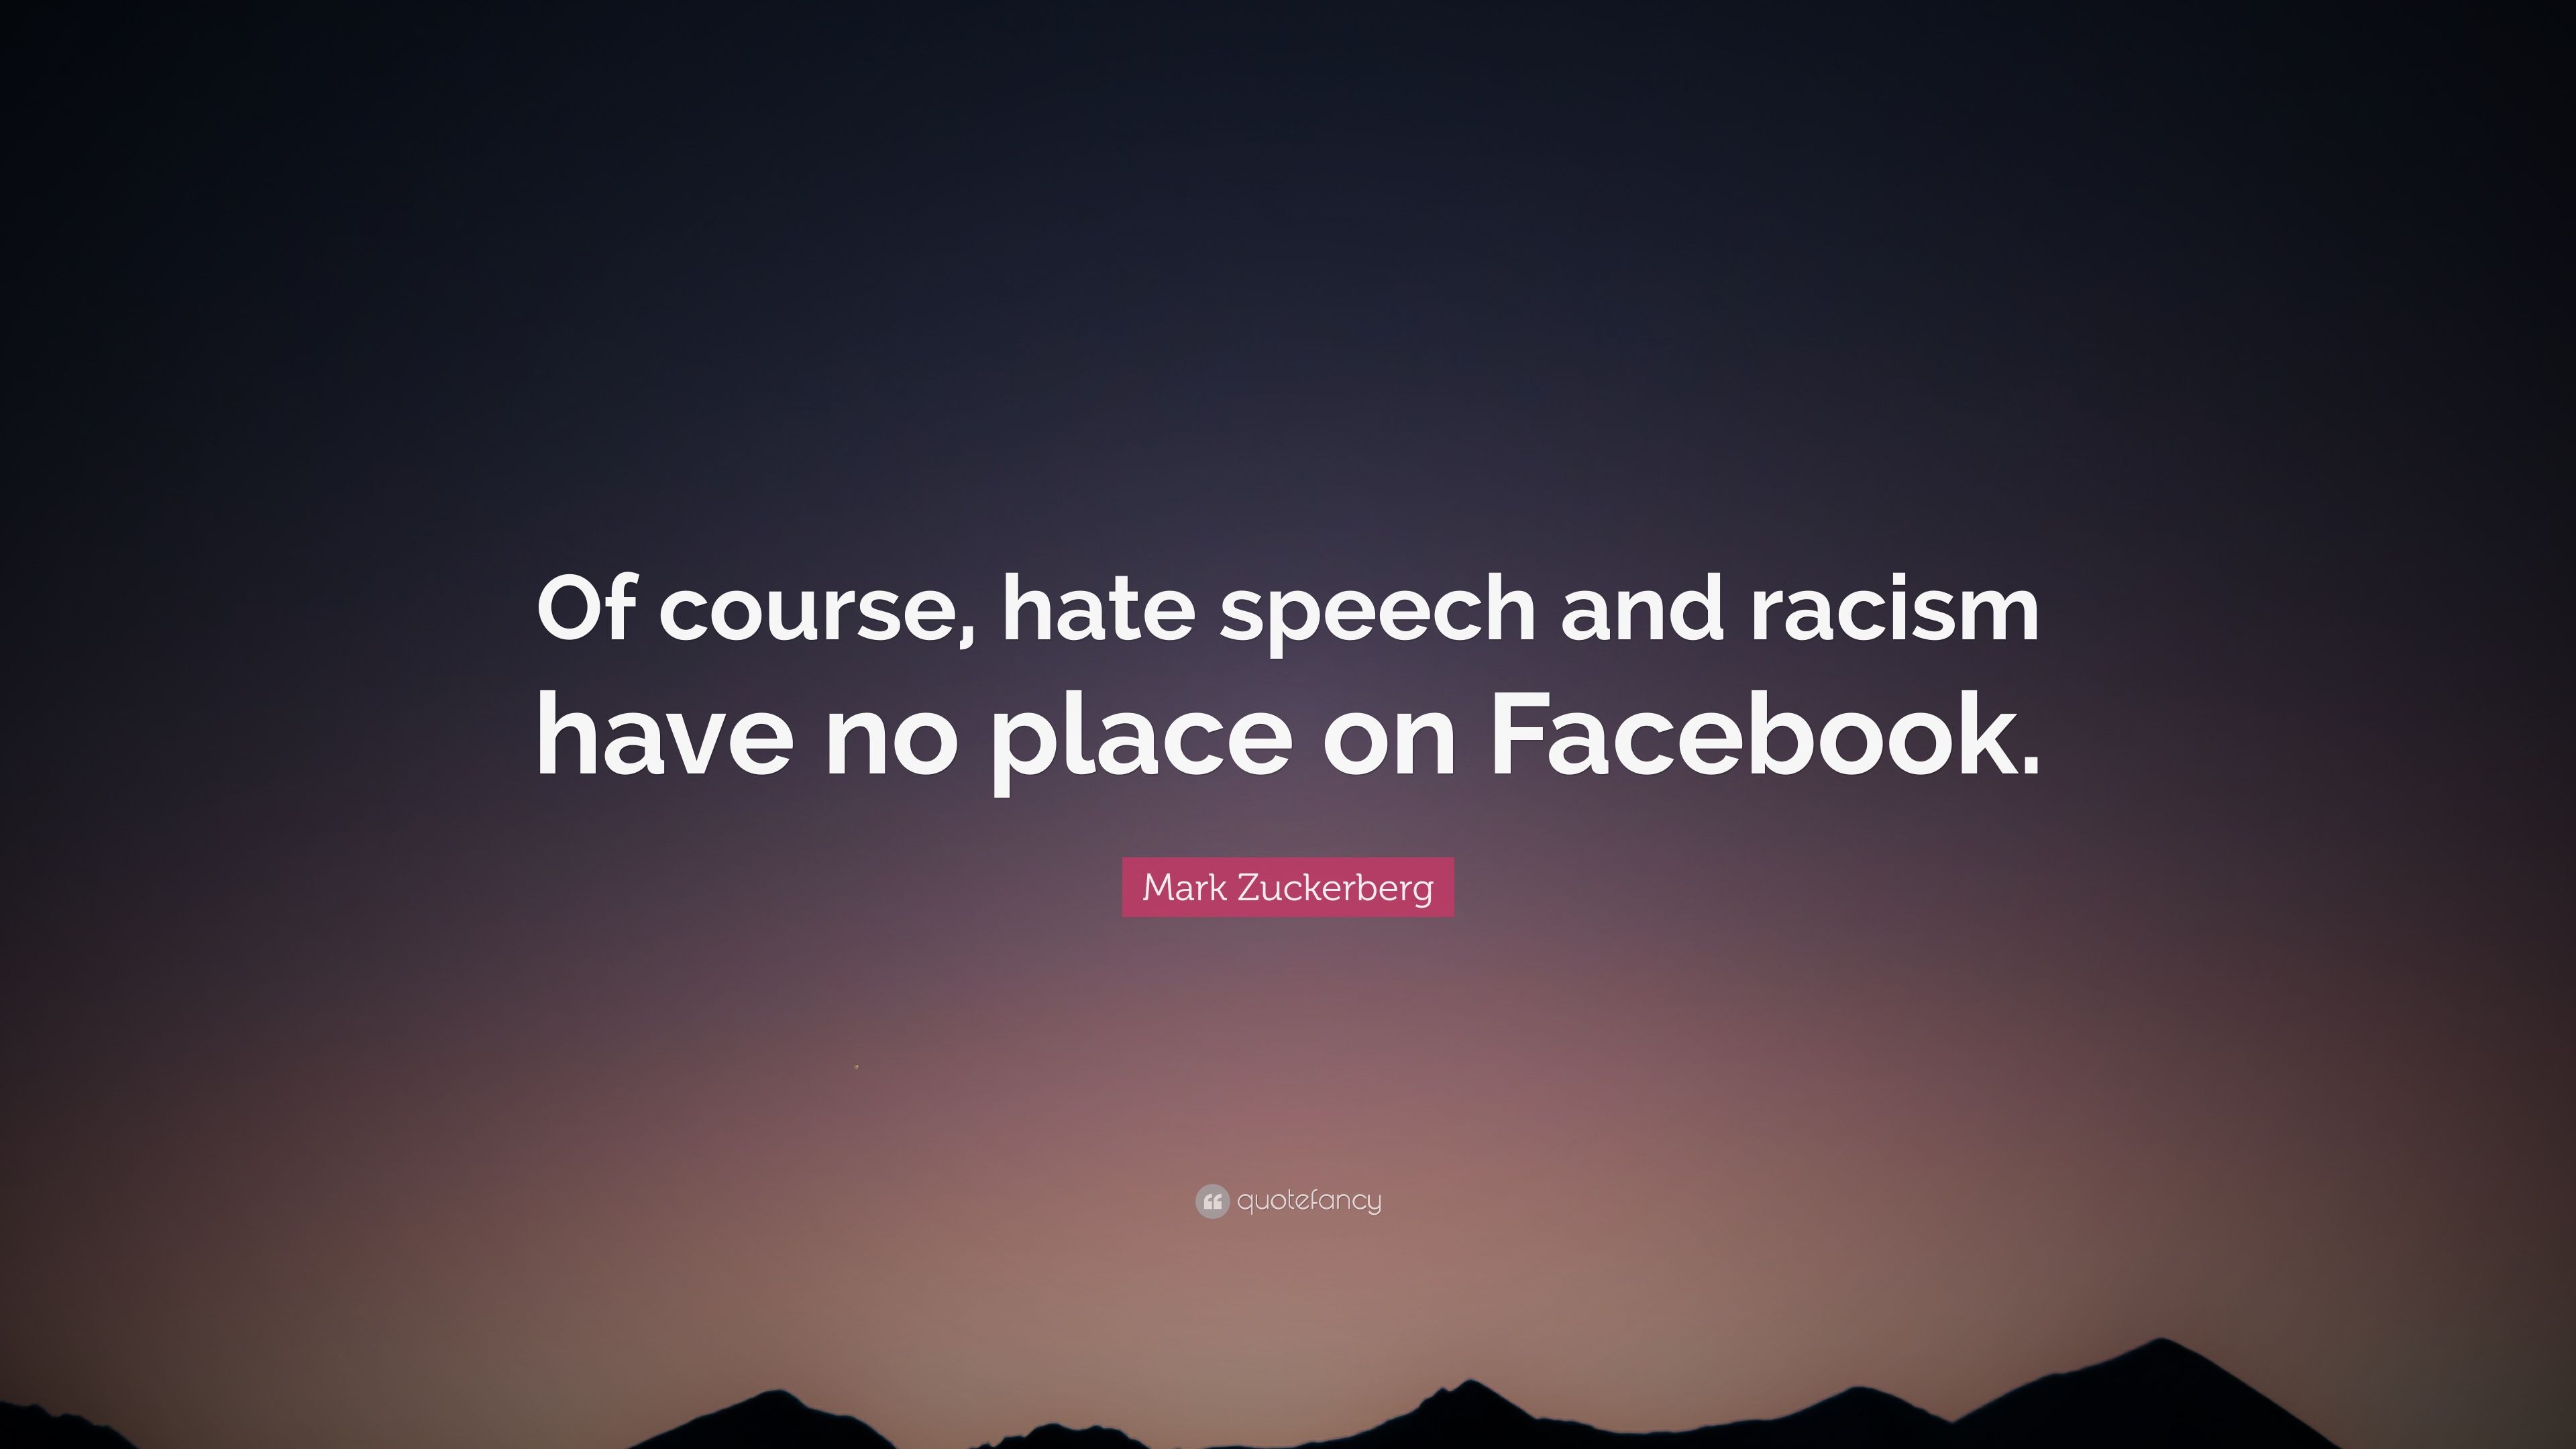 Mark Zuckerberg Quote: “Of course, hate speech and racism have no